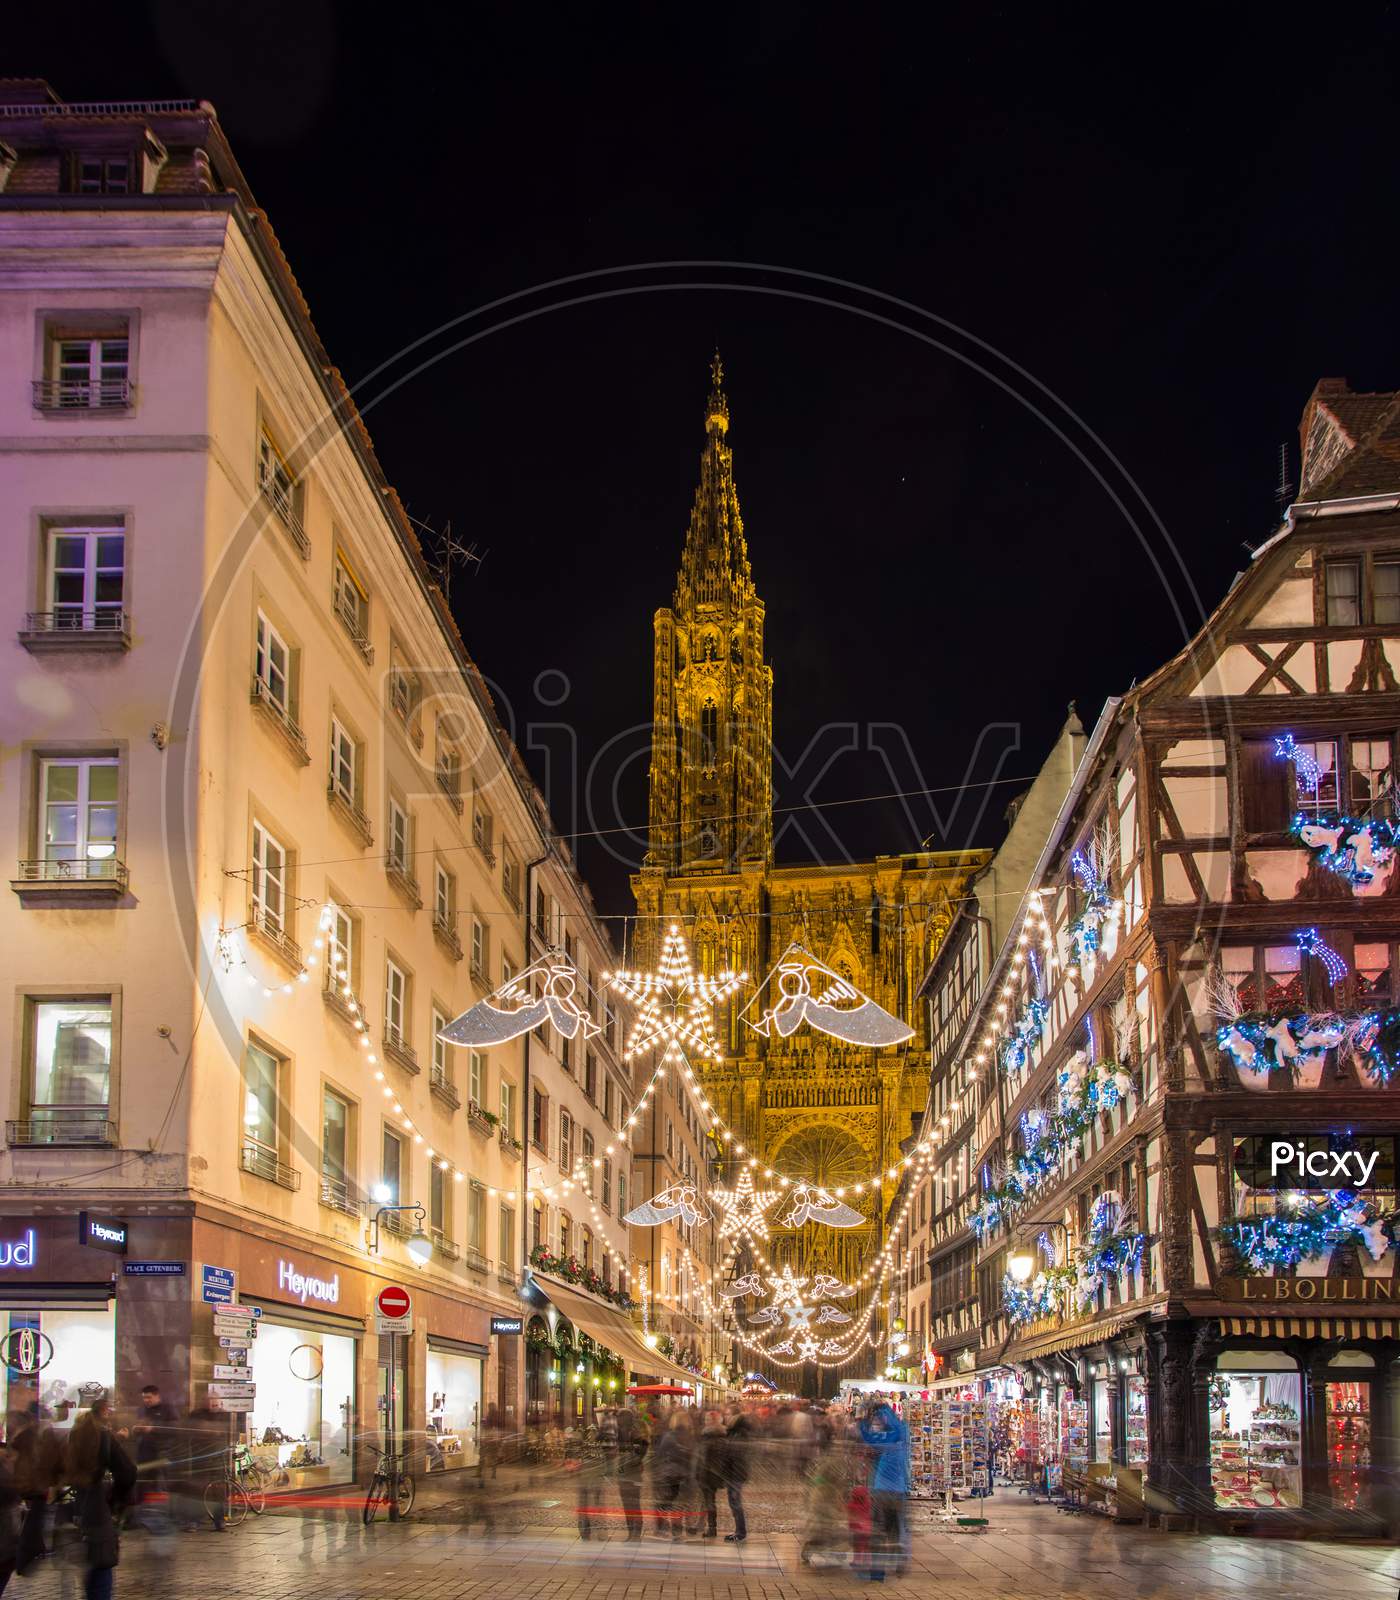 View Of Notre-Dame De Strasbourg With Christmas Illumination